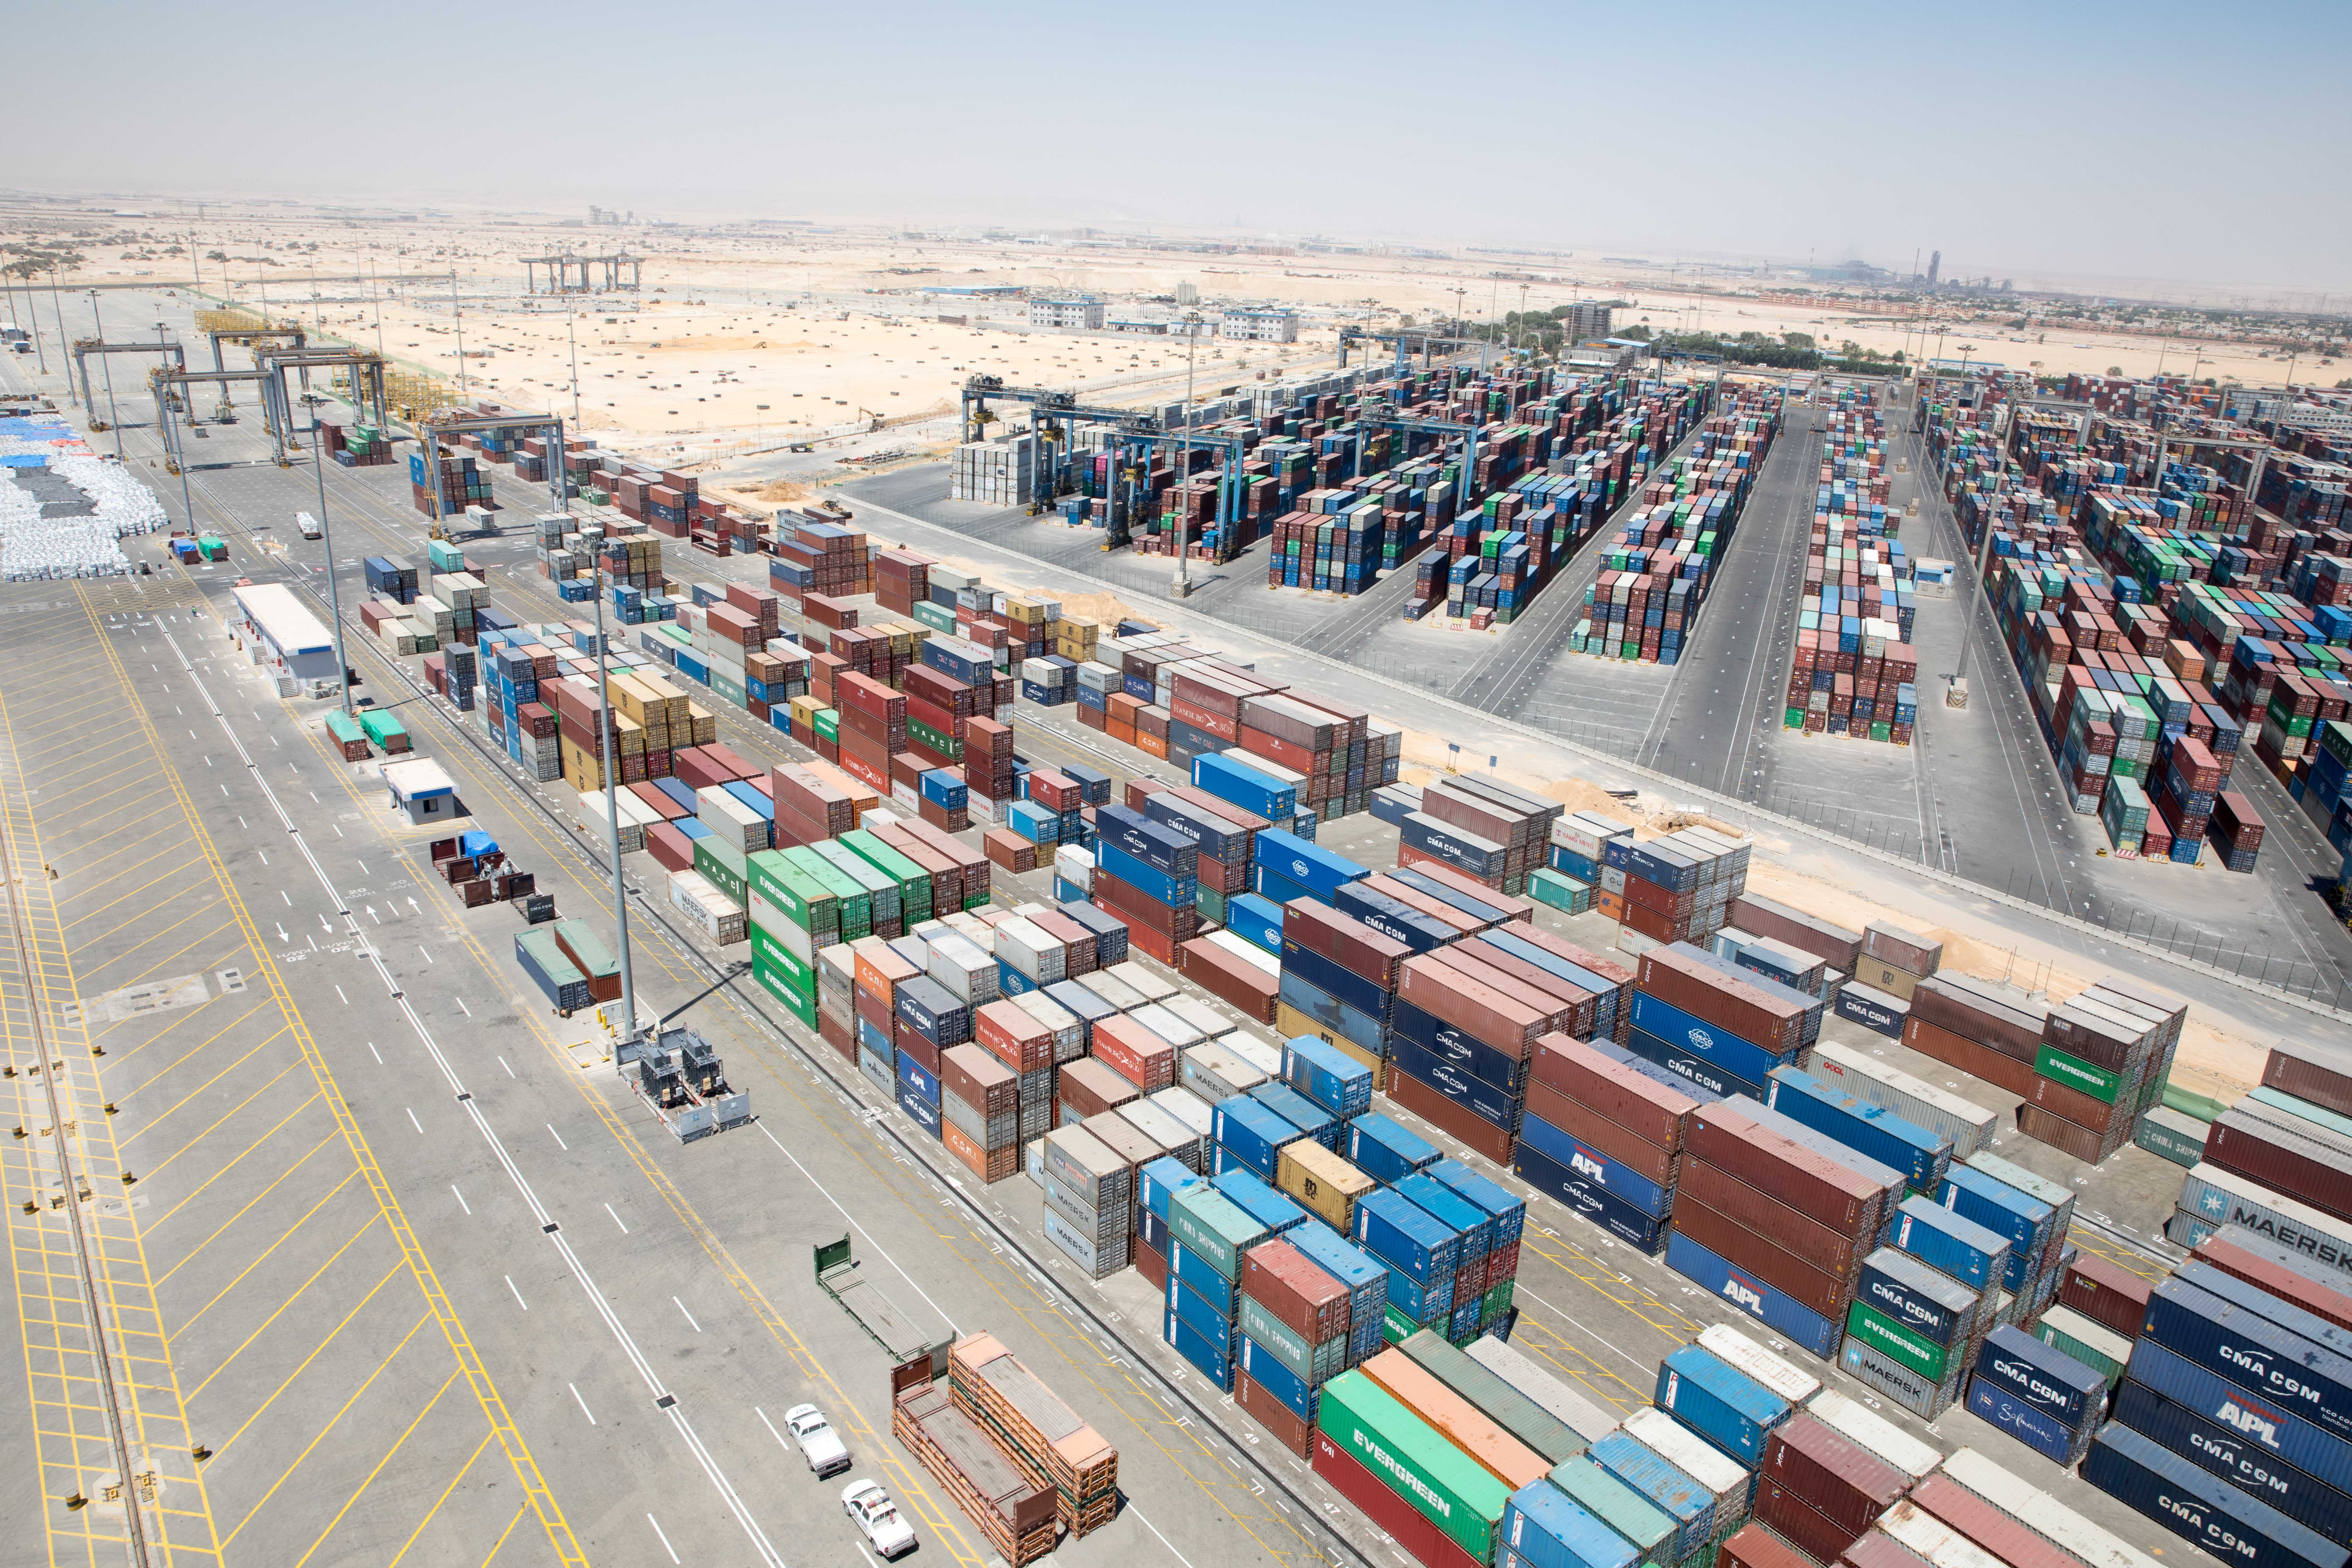 In pics: 20 bn investments puts Sokhna port on global trade map